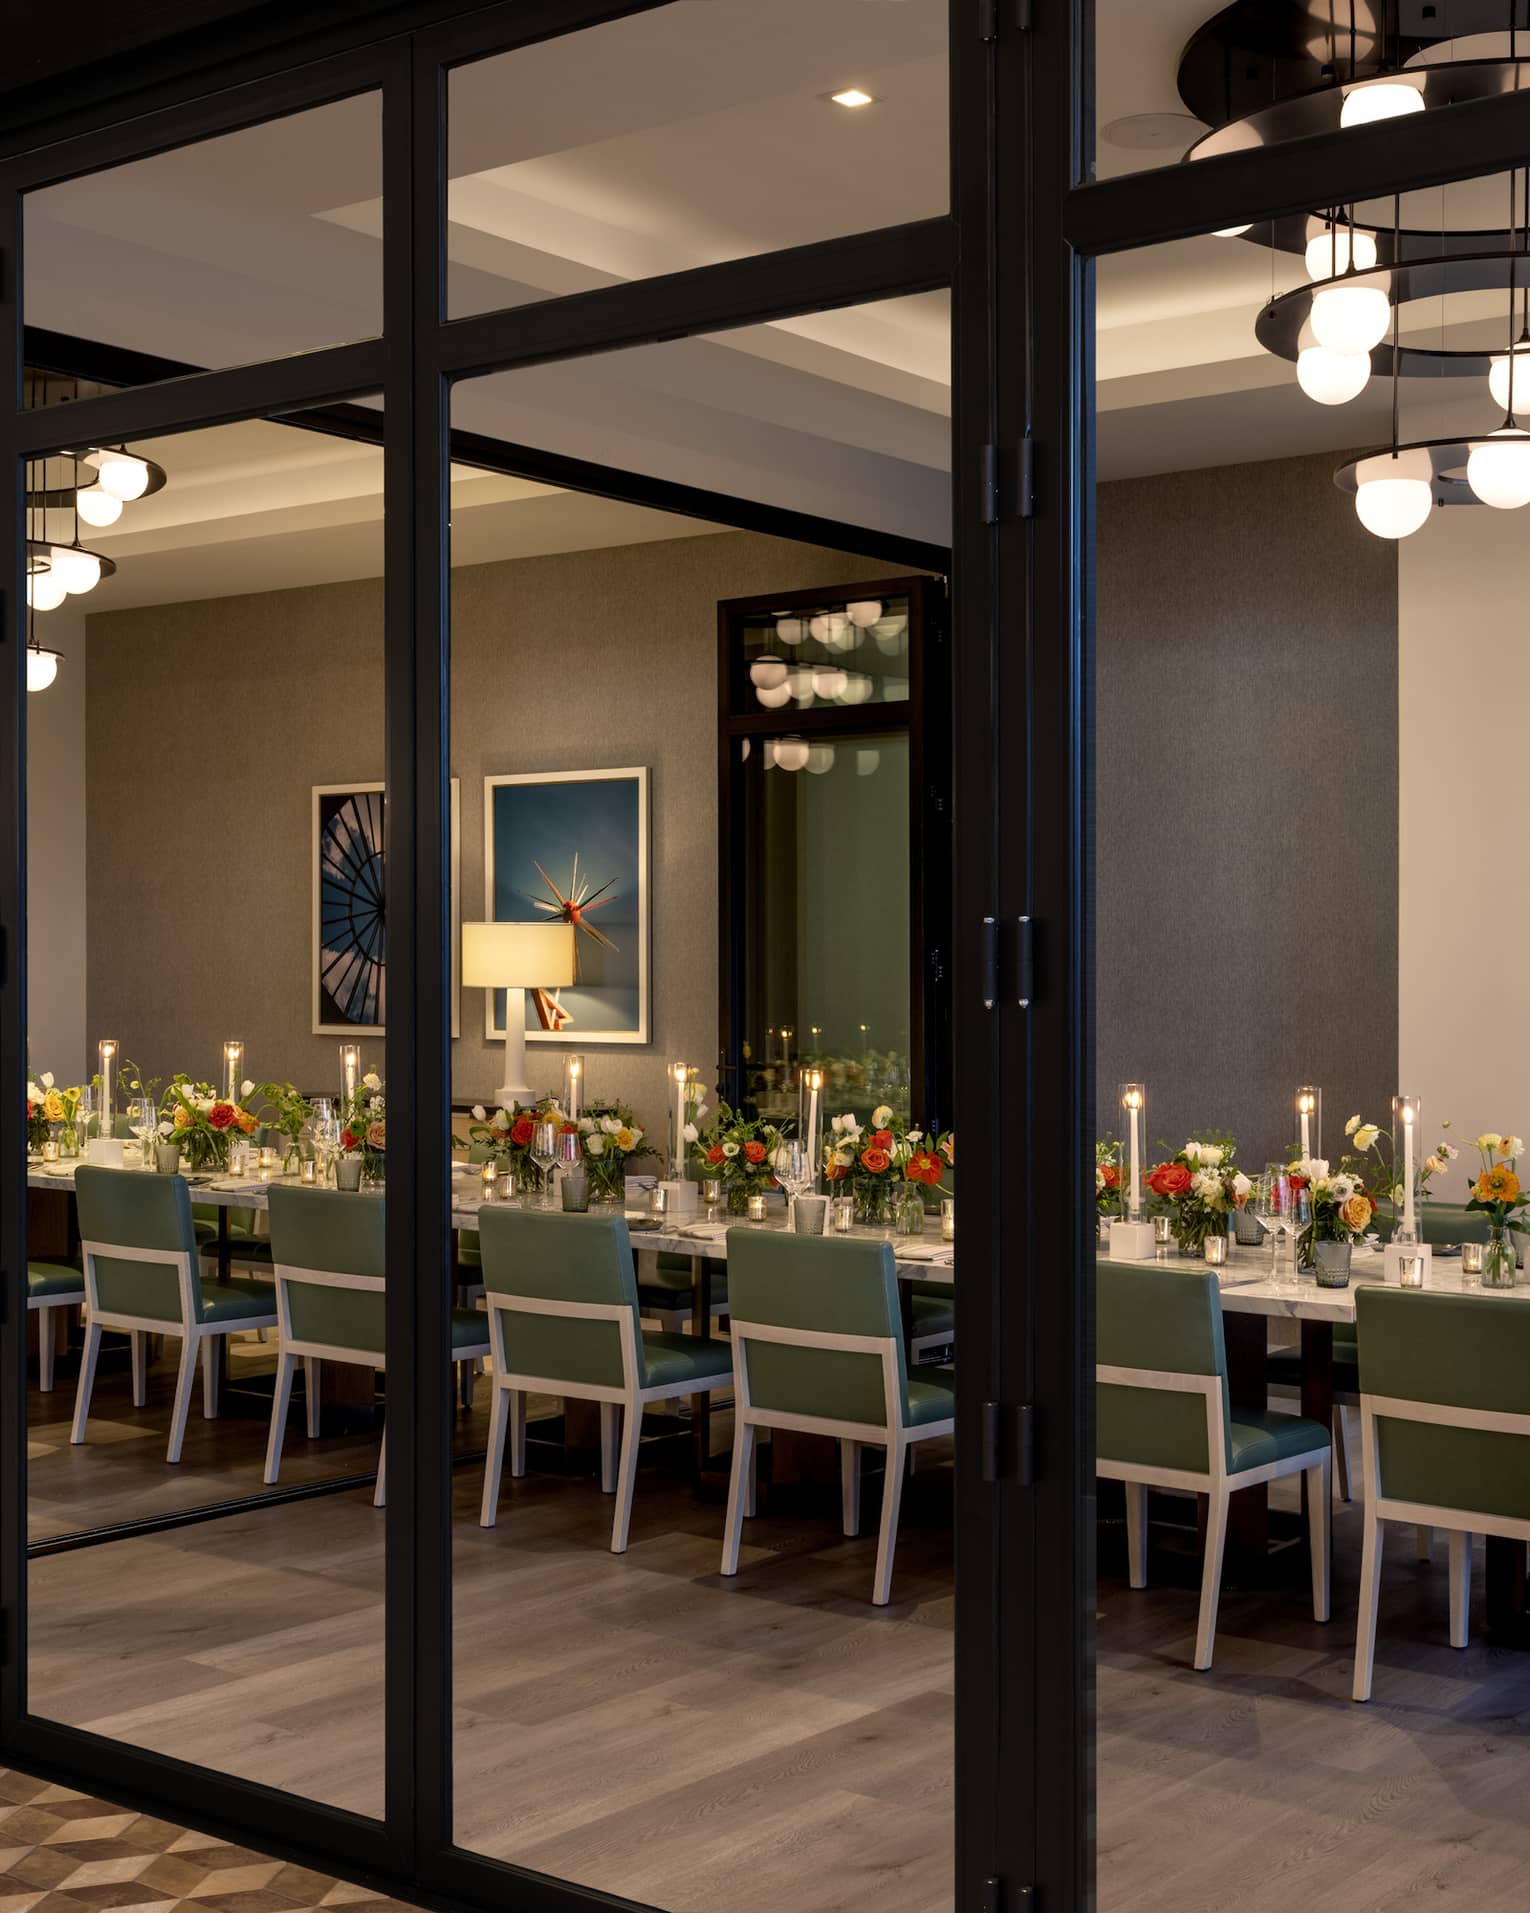 Private dining room in glass-walled room of restaurant